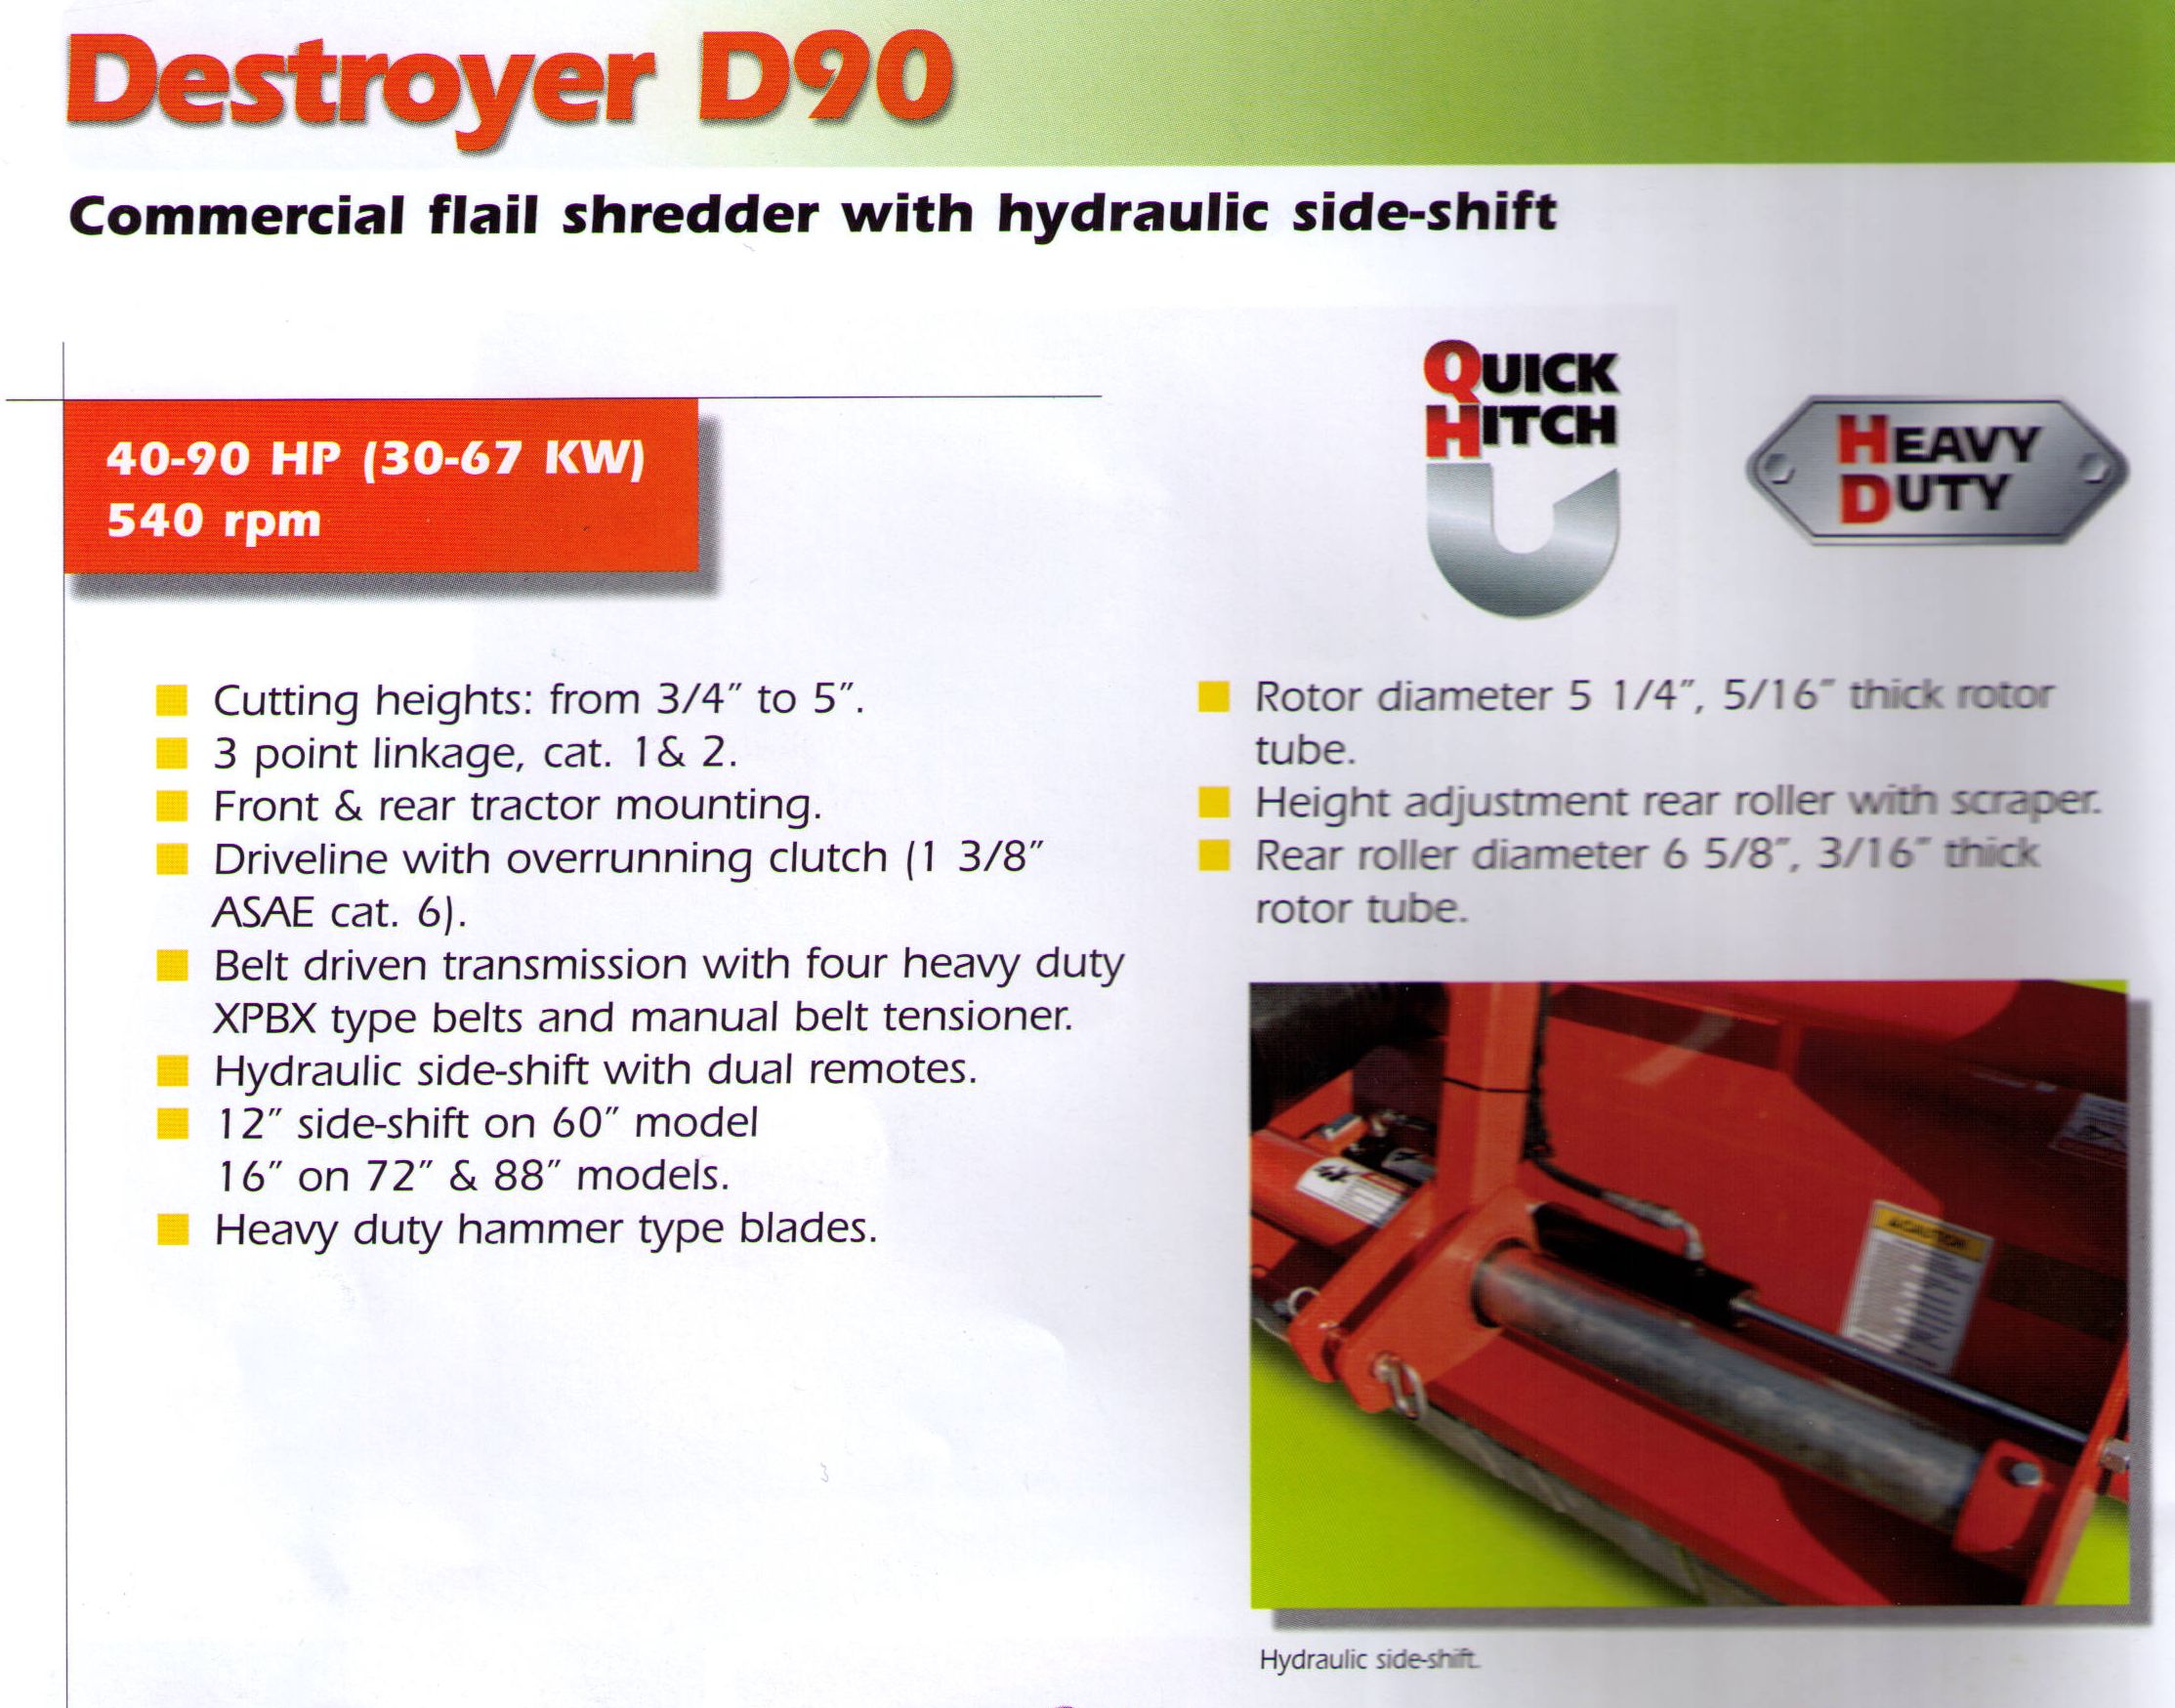 Specifications Befco Destroyer D90 Commercial Flail Stredder With Hydraulic Side Shift